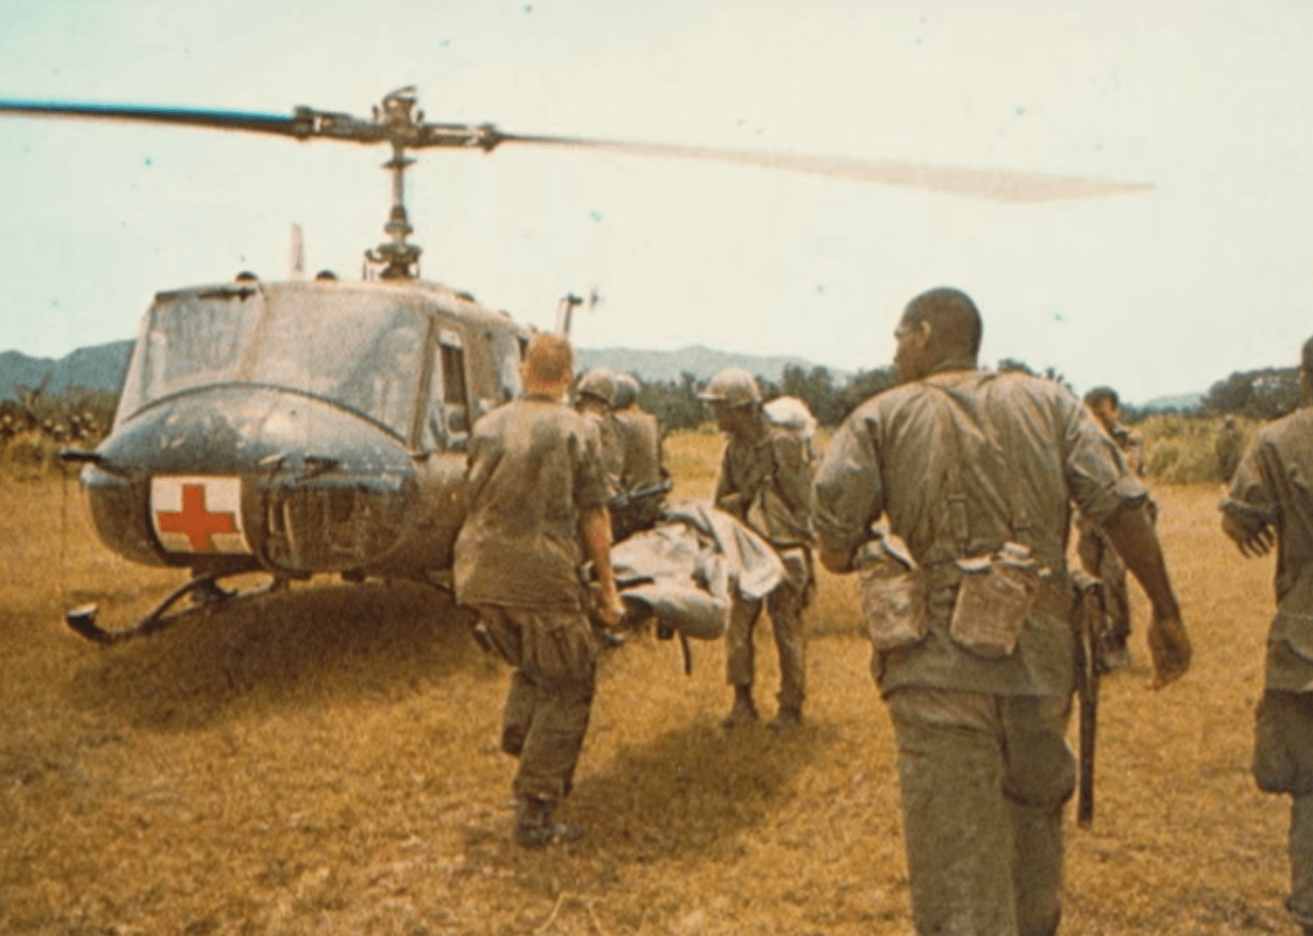 A medevac helicopter with a Red Cross on its nose, soldiers carrying a body on a stretcher toward the helicopter.